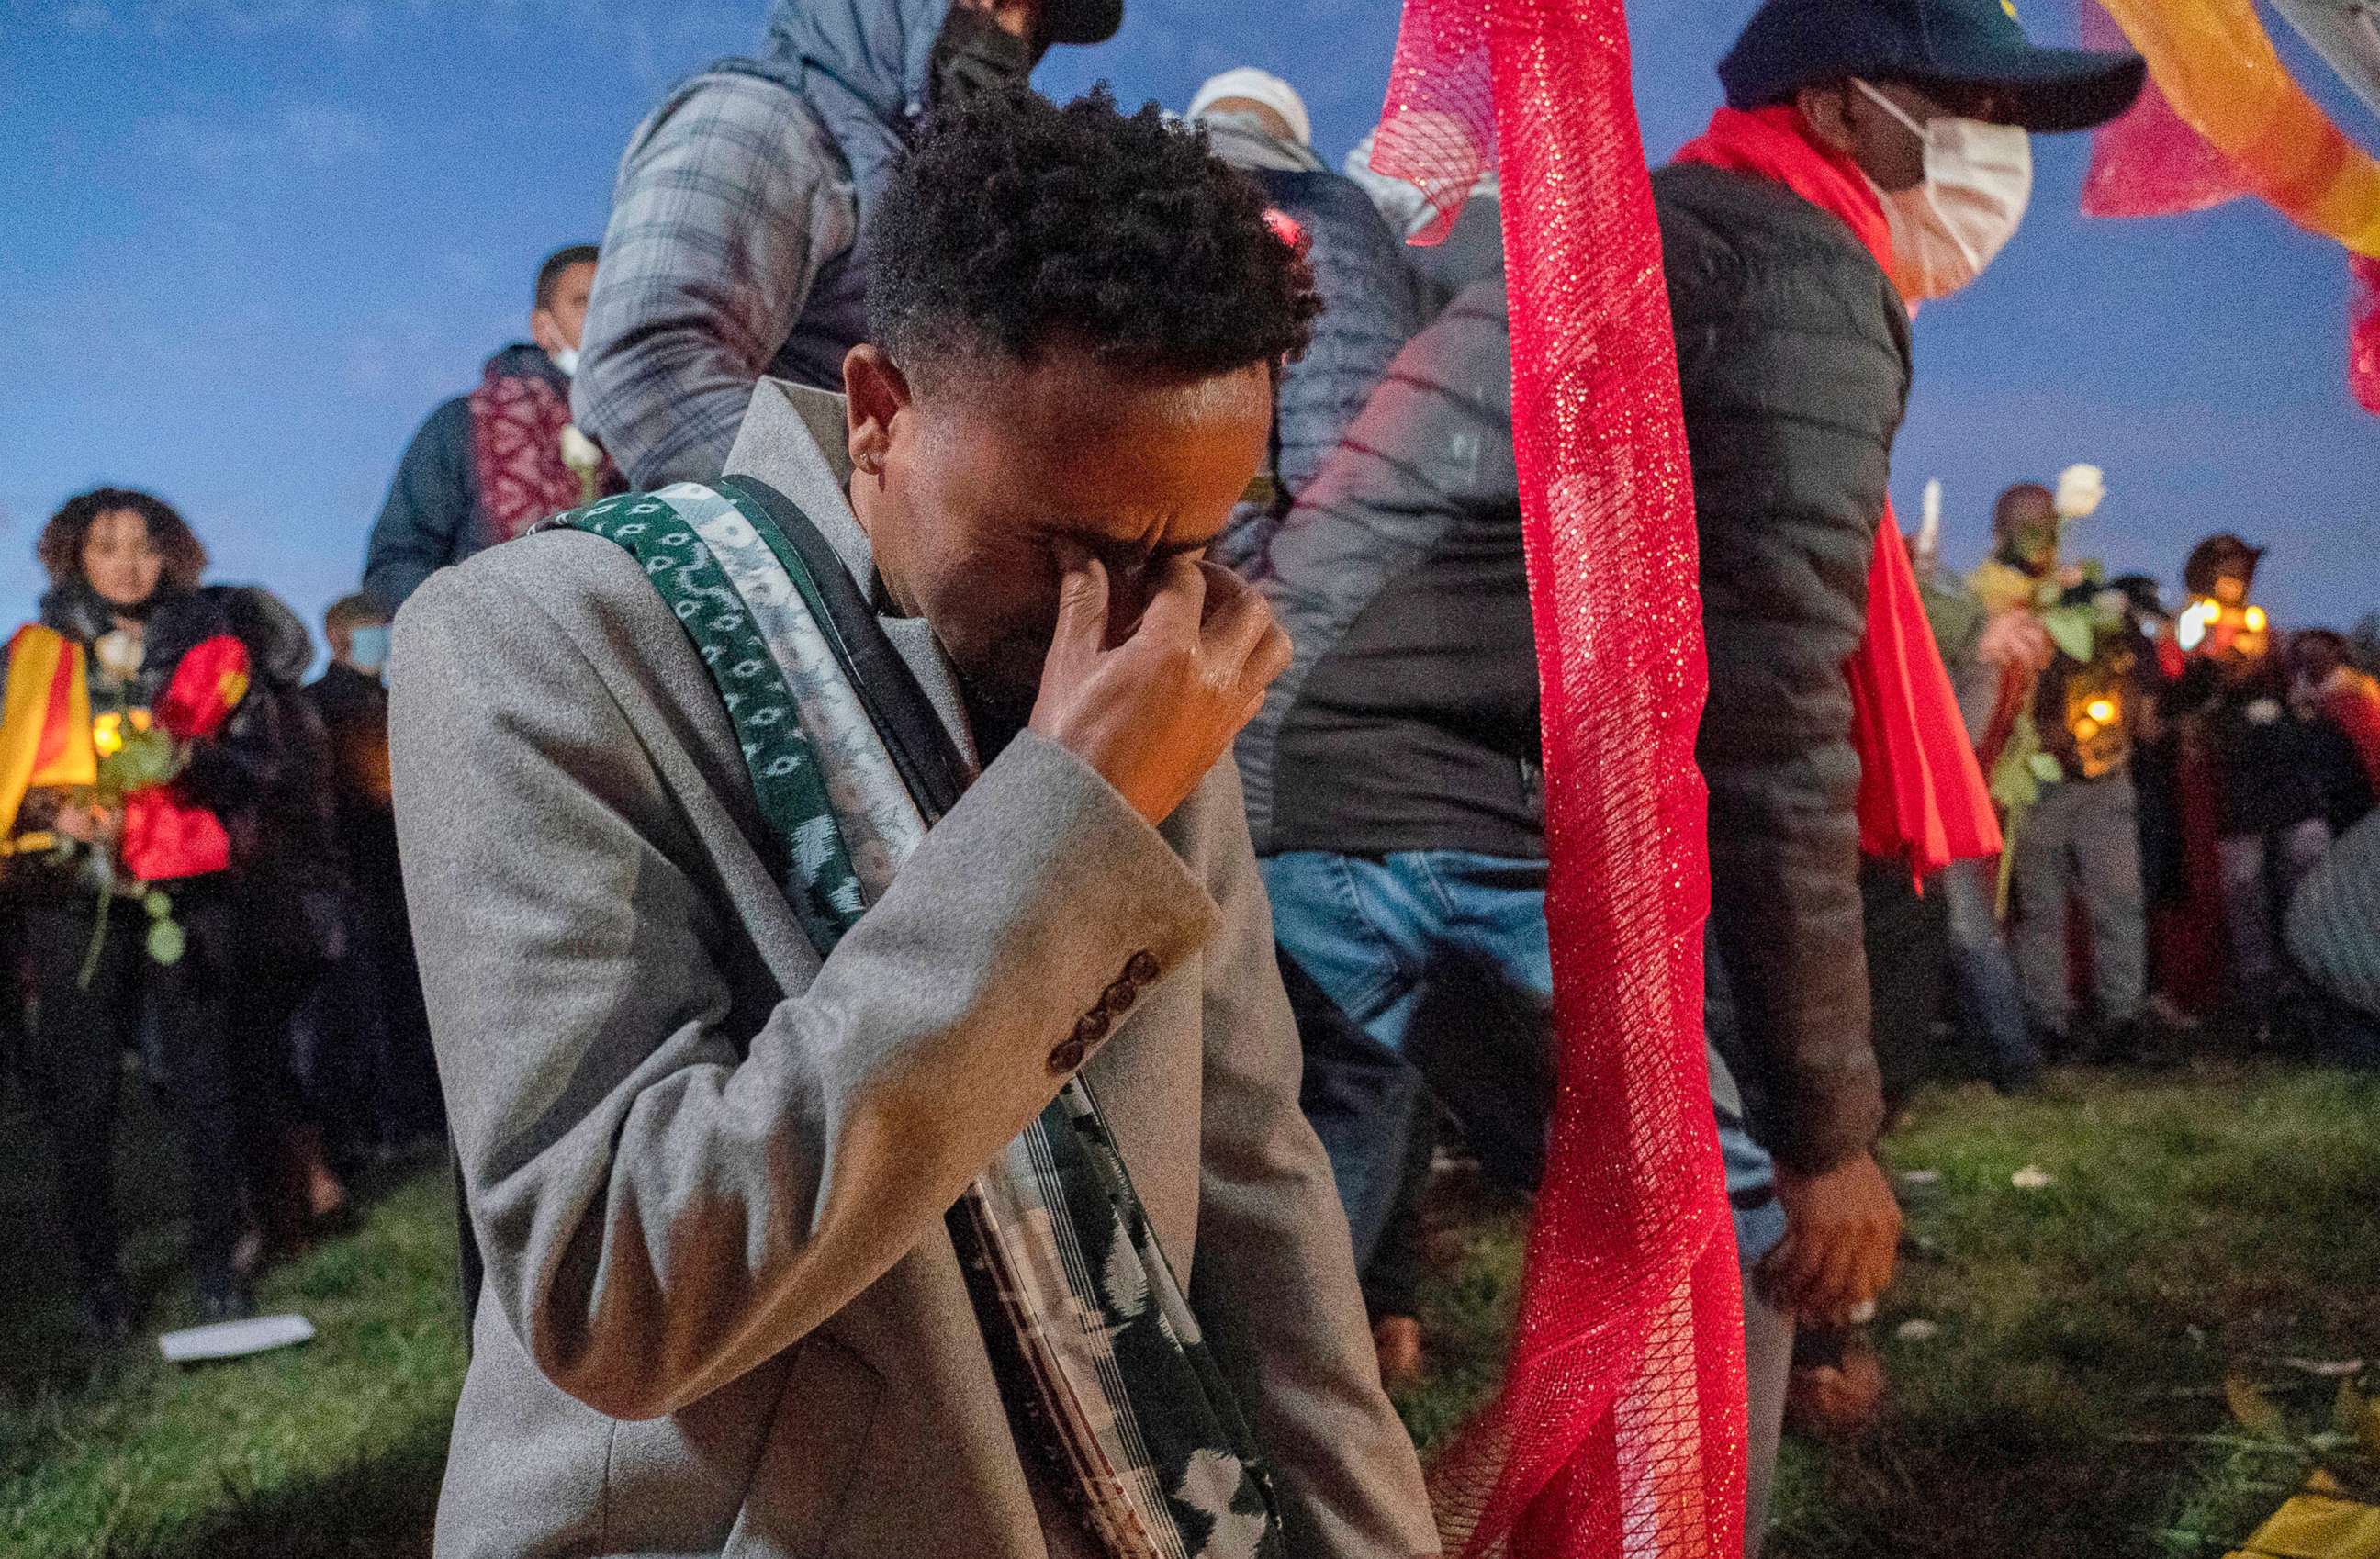 PHOTO: Angesom cries after offering flowers during an event in Washington to commemorate Gebrehiwot Yemane and Haben Sahle Newfie, his two-nephews who were among the people killed in the Ethiopia attacks in Tigray, Ethiopia, Nov. 4, 2021.